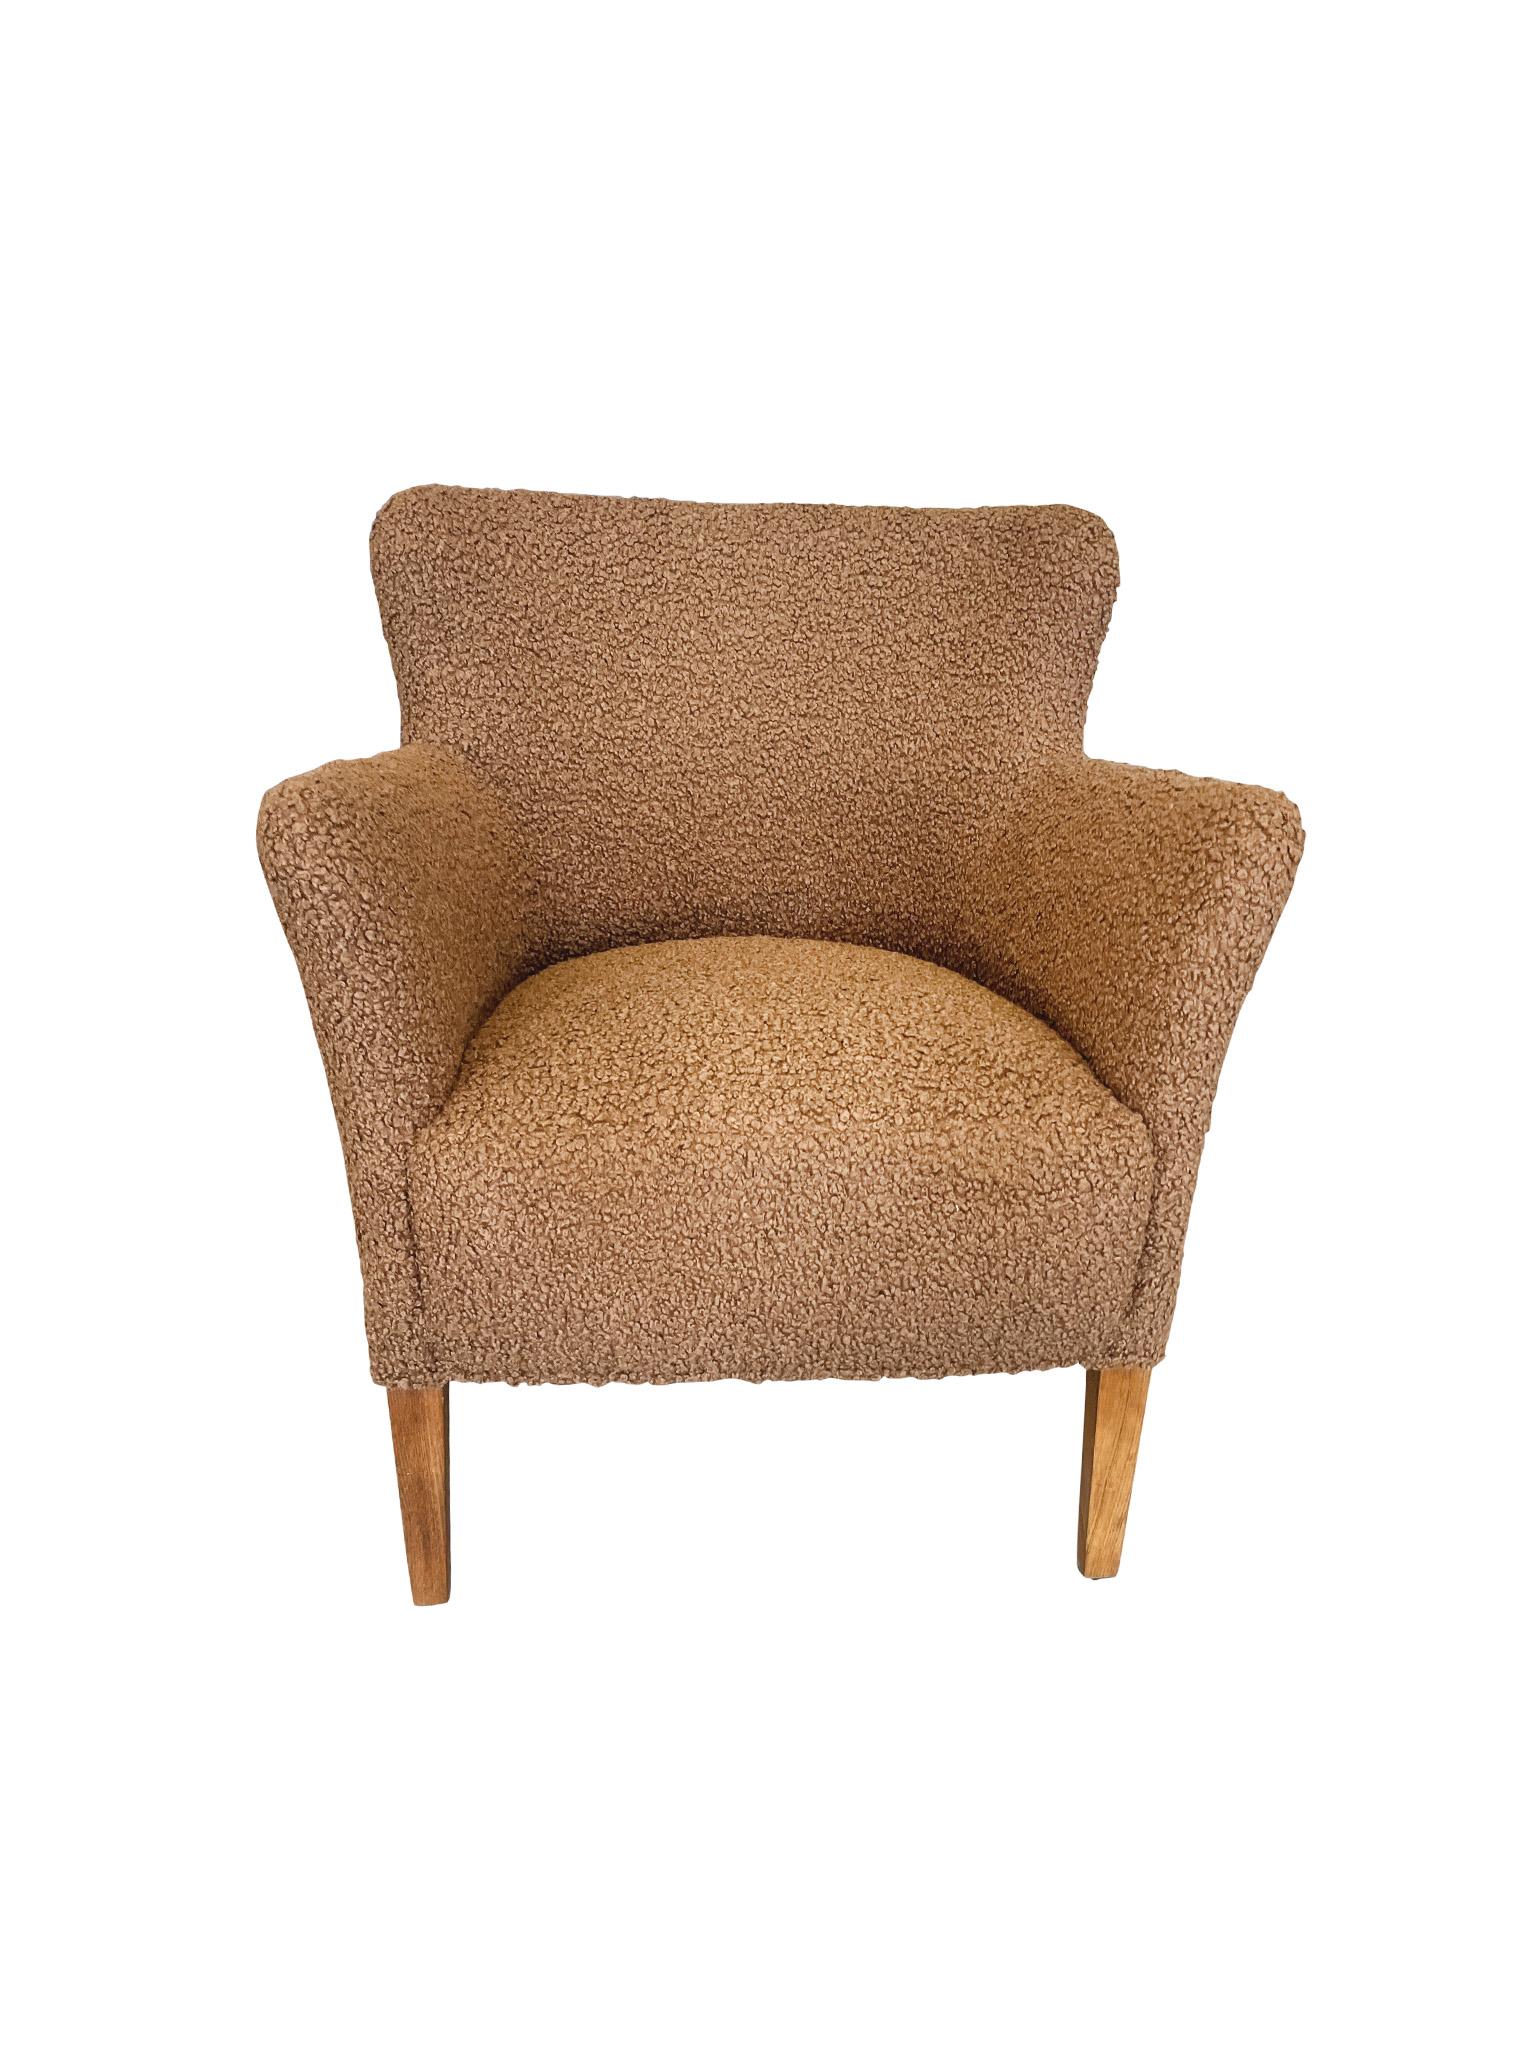 Structurally, this small 1950s Danish lounge chair by Birte Iversen is designed with a low back that curves slightly inward, rounded corners, and high legs crafted from beech wood. It has been newly reupholstered in a richly textured caramel bouclé